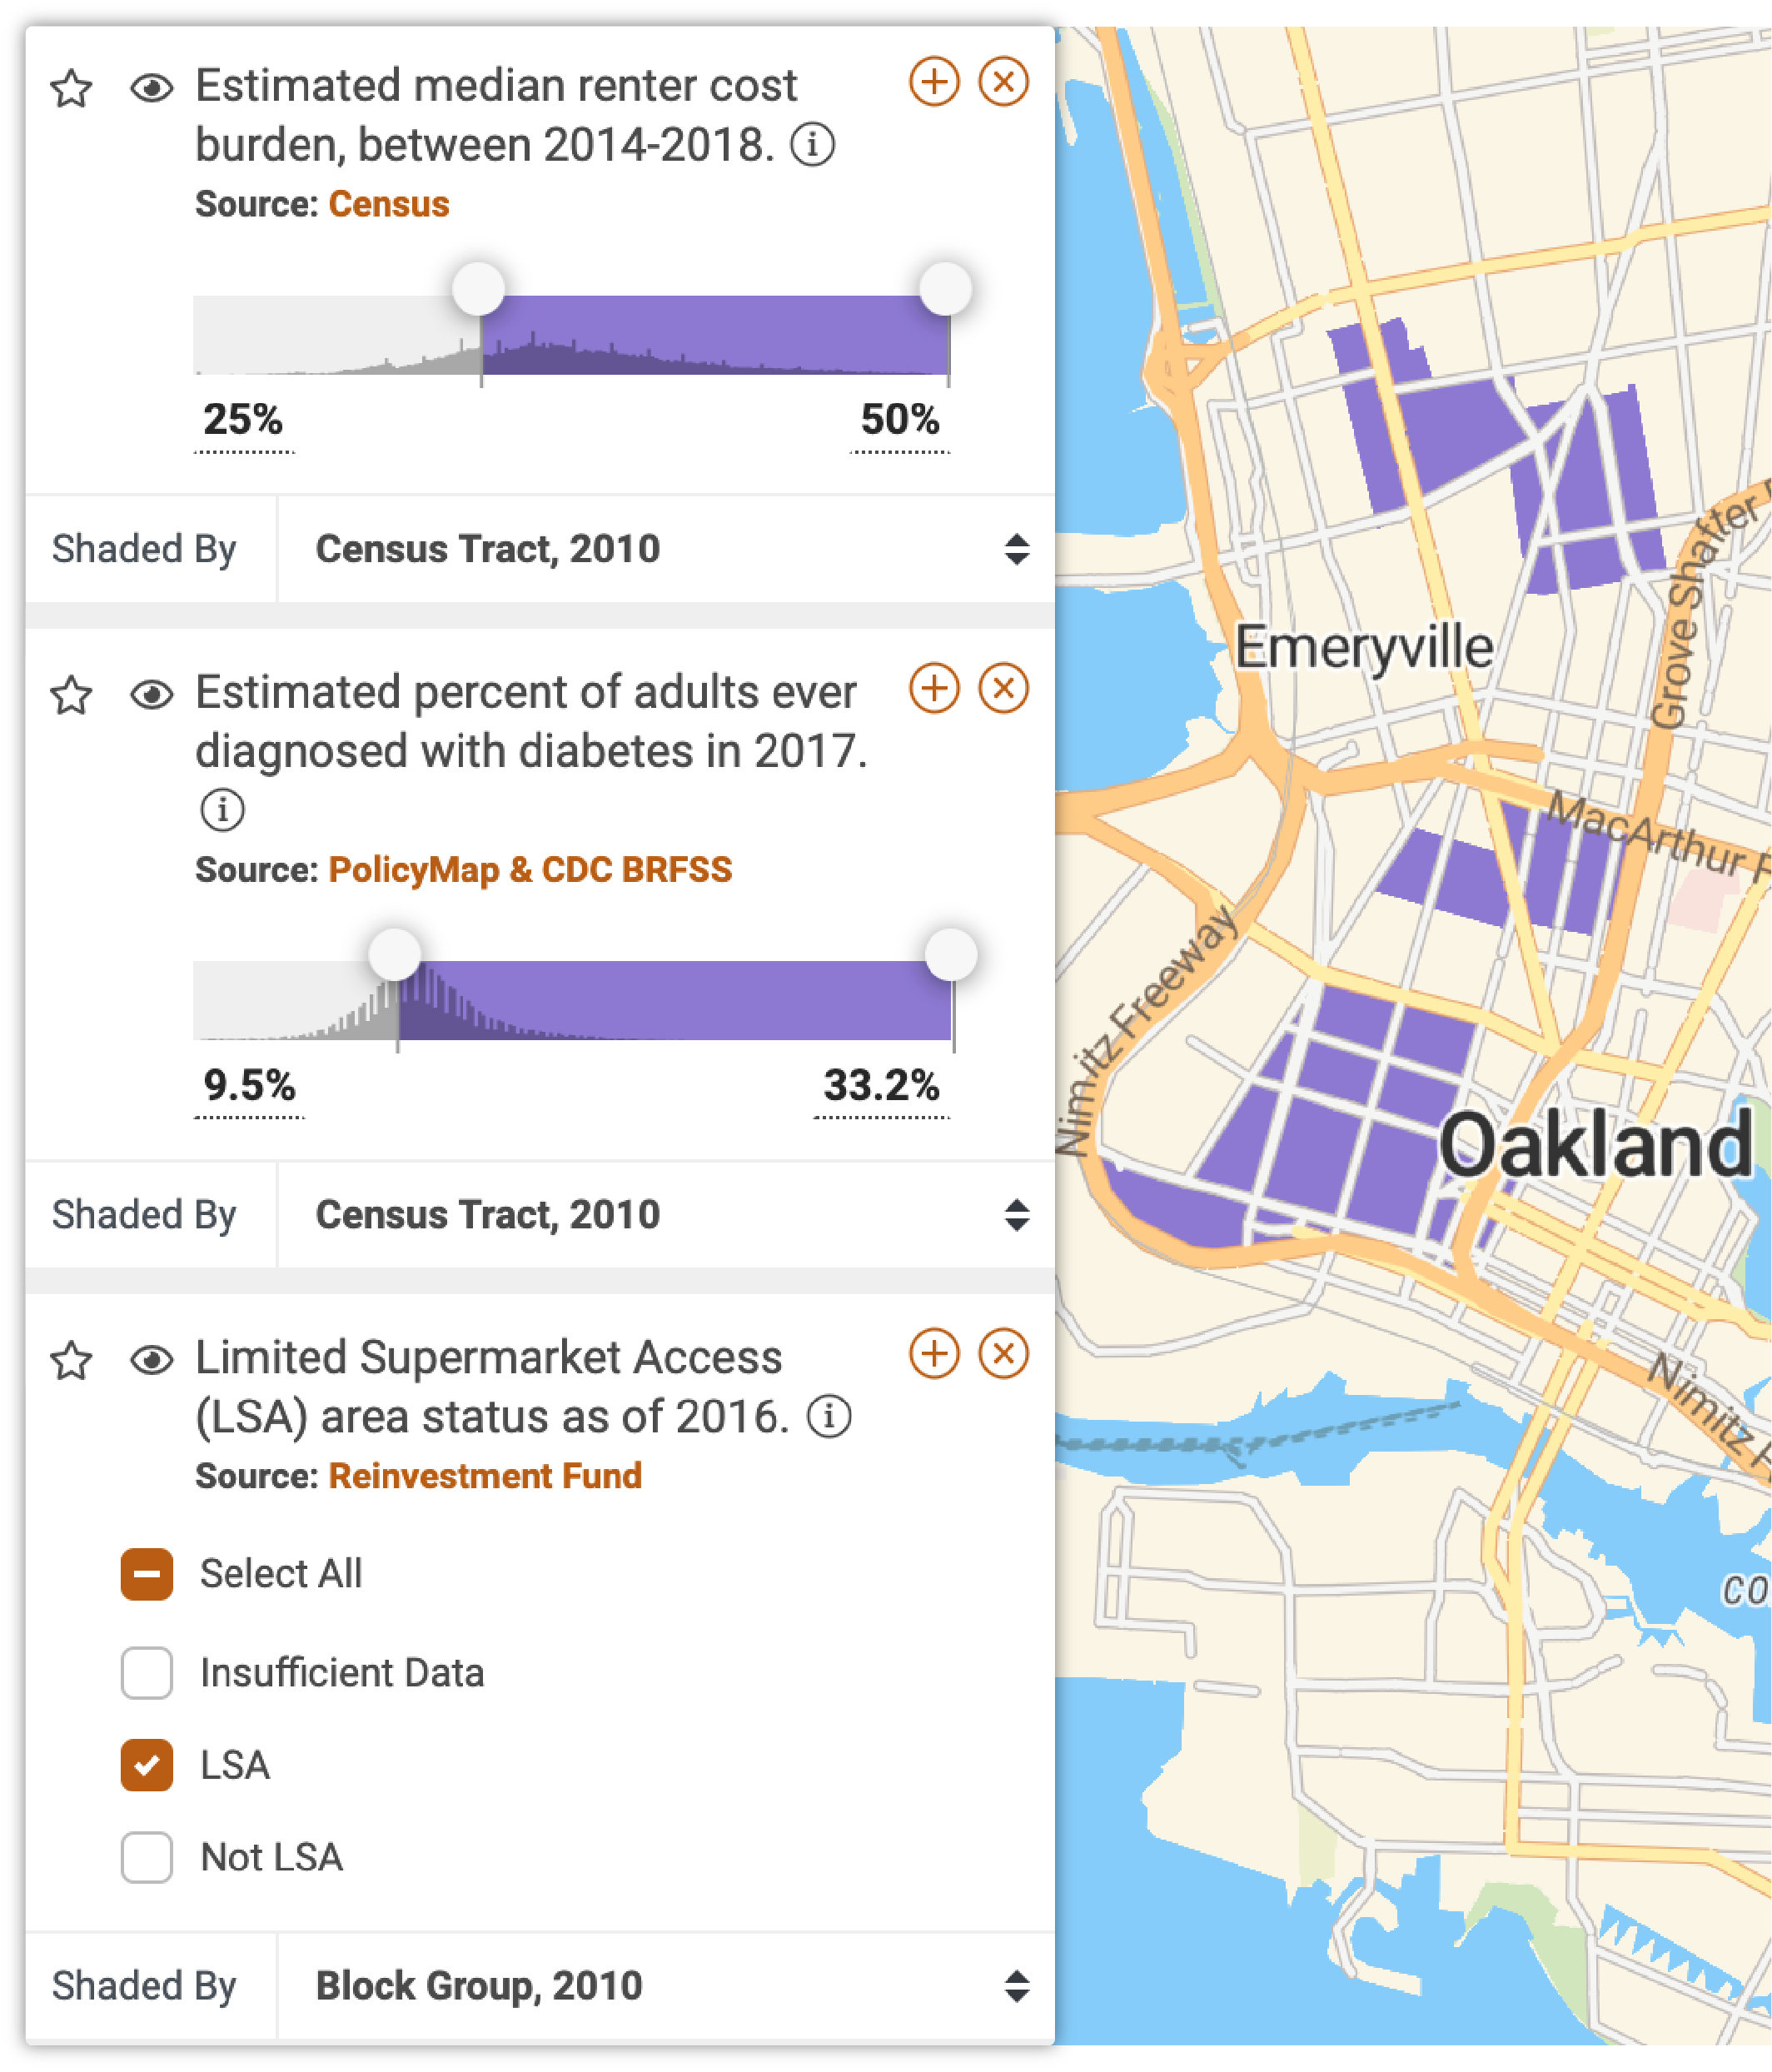 Map showing diabetes, renter cost burdens, and Limited Supermarket Access